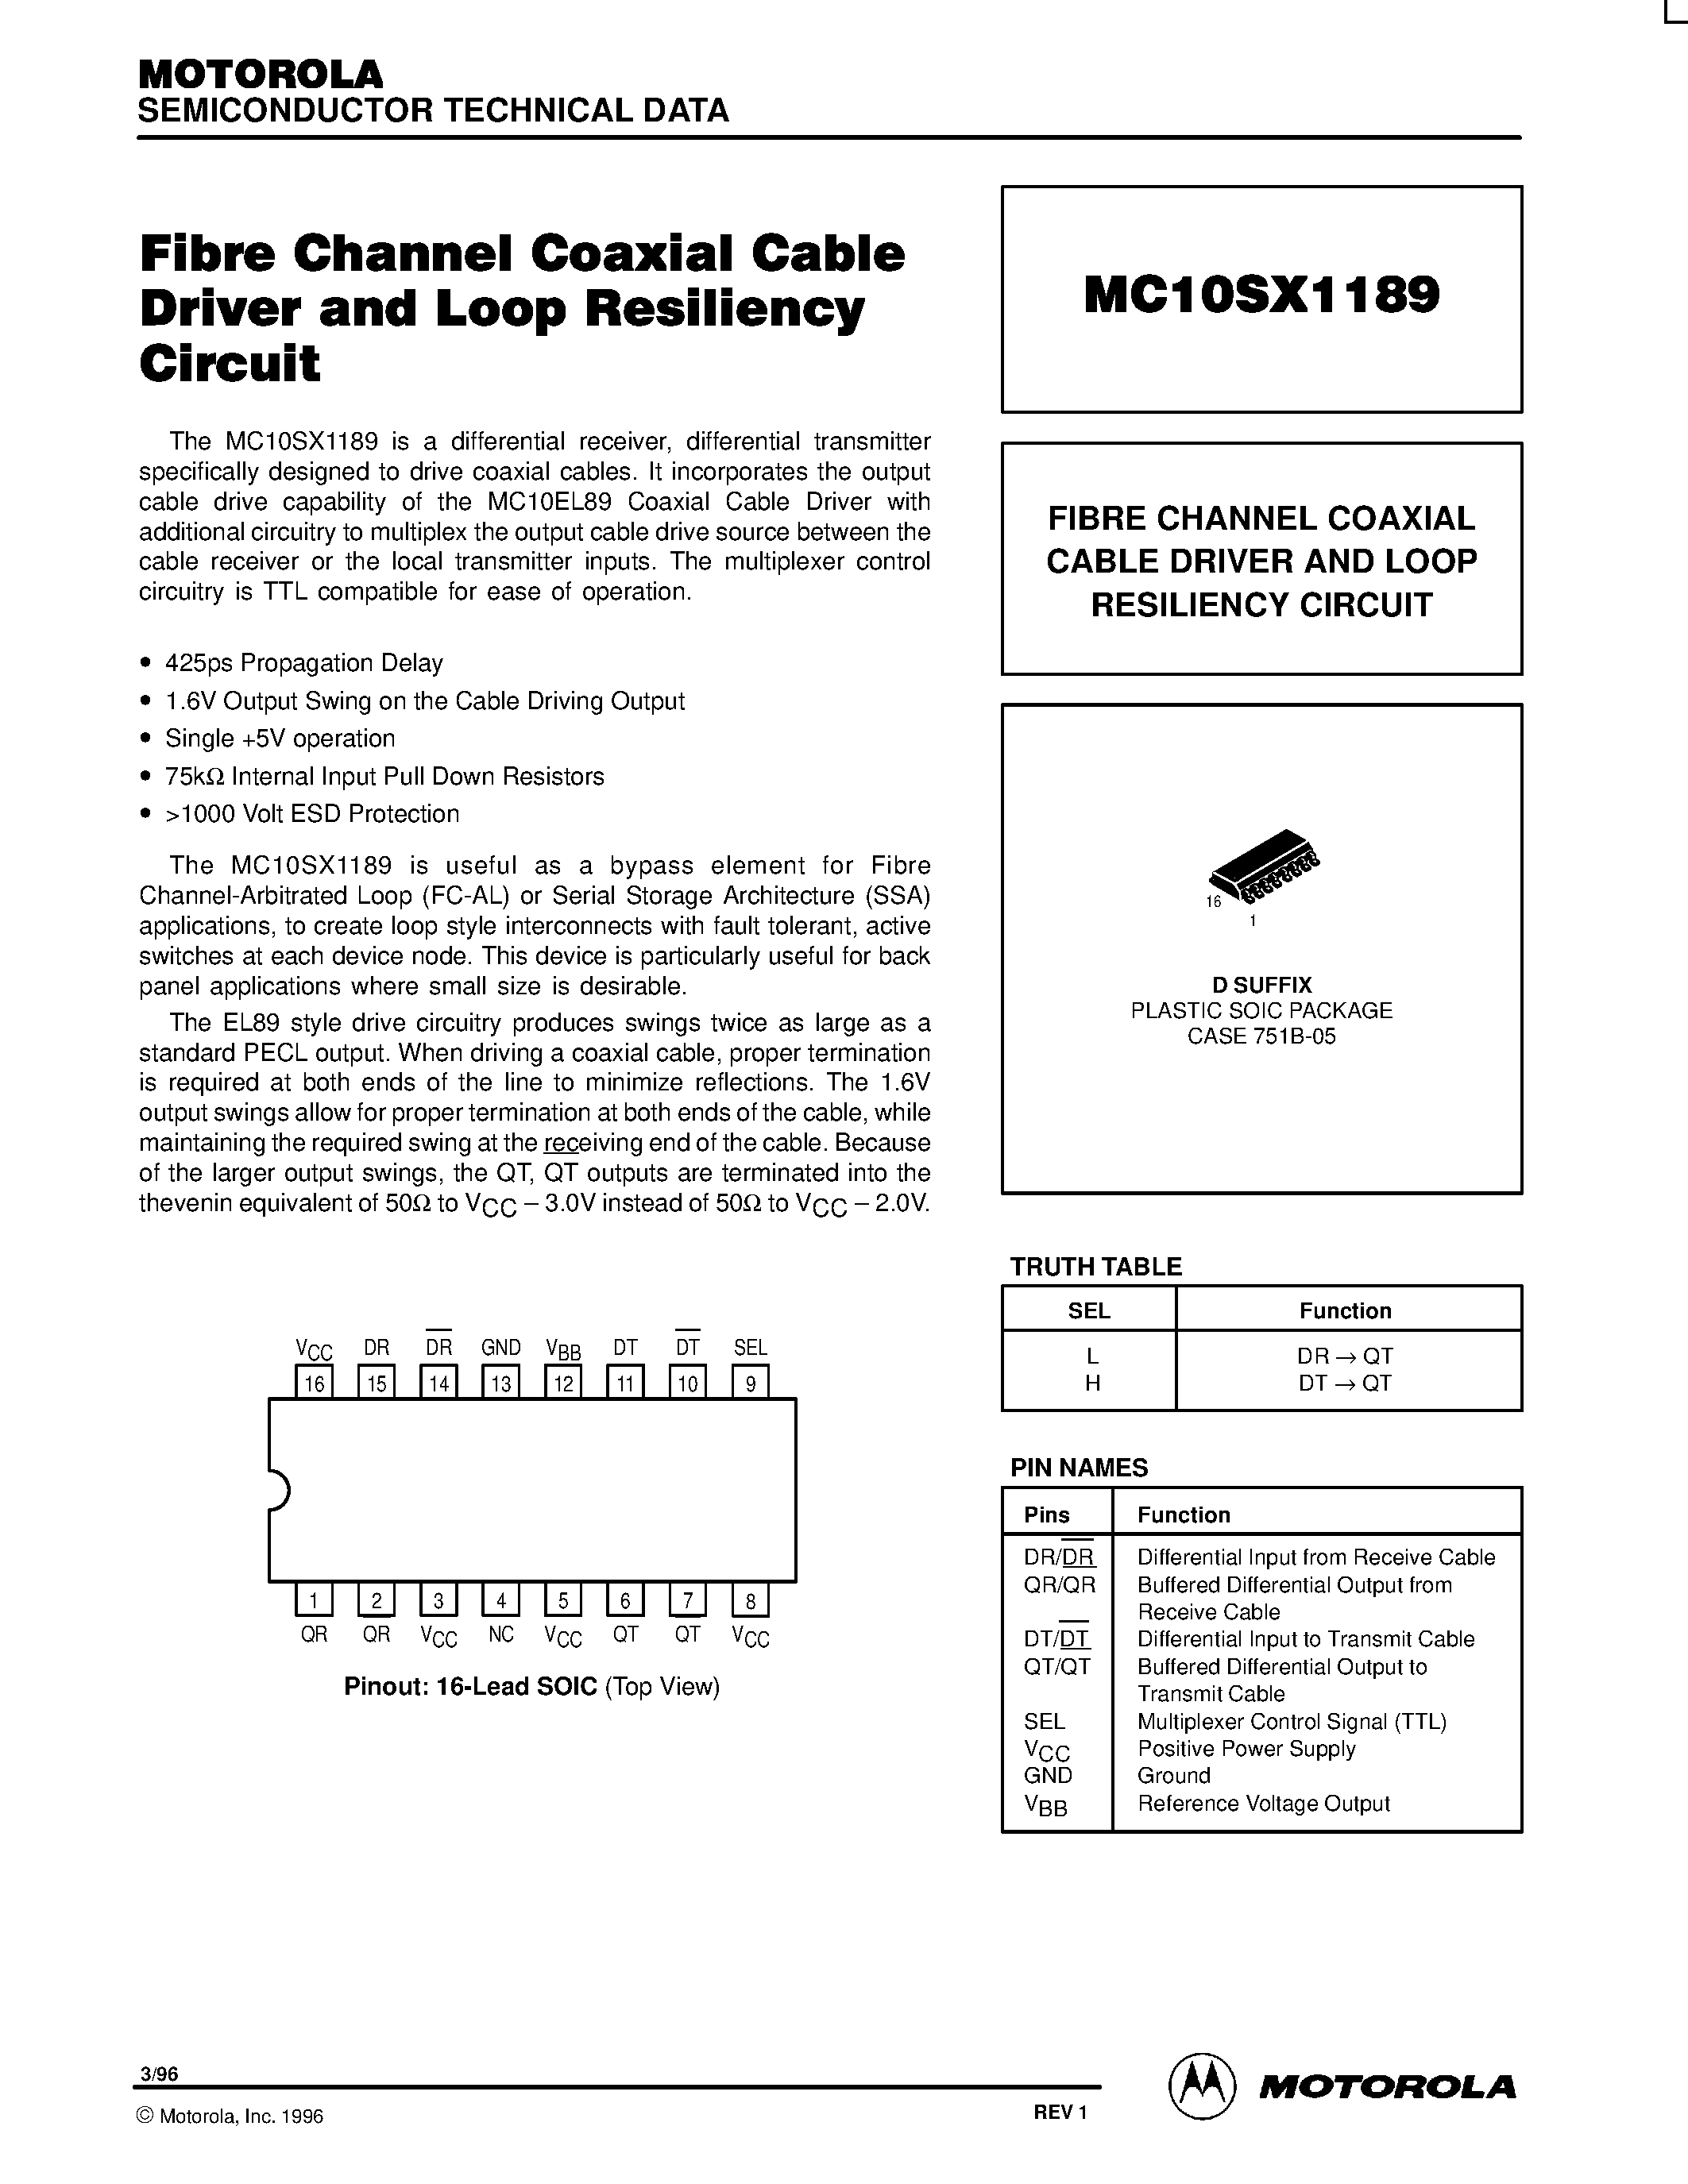 Даташит MC10SX1189D - FIBRE CHANNEL COAXIAL CABLE DRIVER AND LOOP RESILIENCY CIRCUIT страница 1